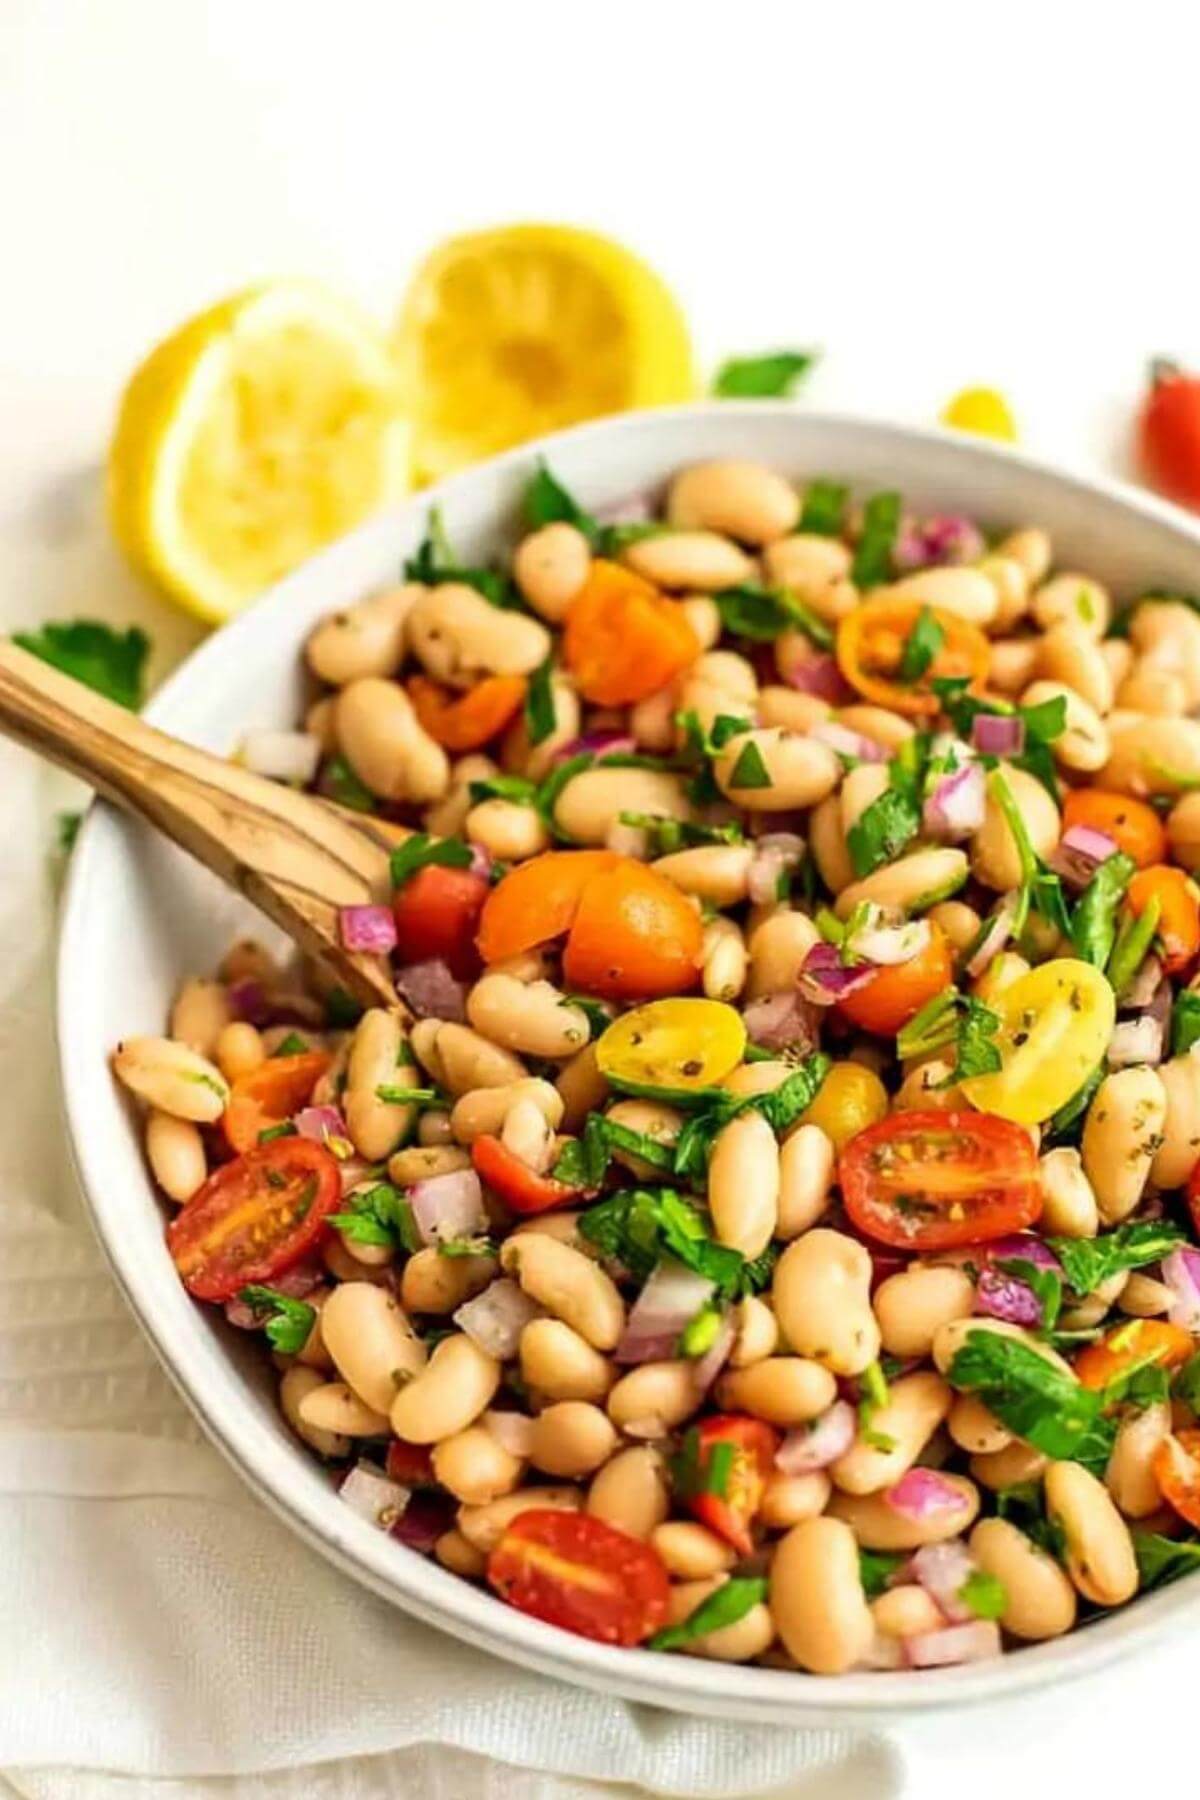 A white bean salad in a large white bowl with lemons in the background.